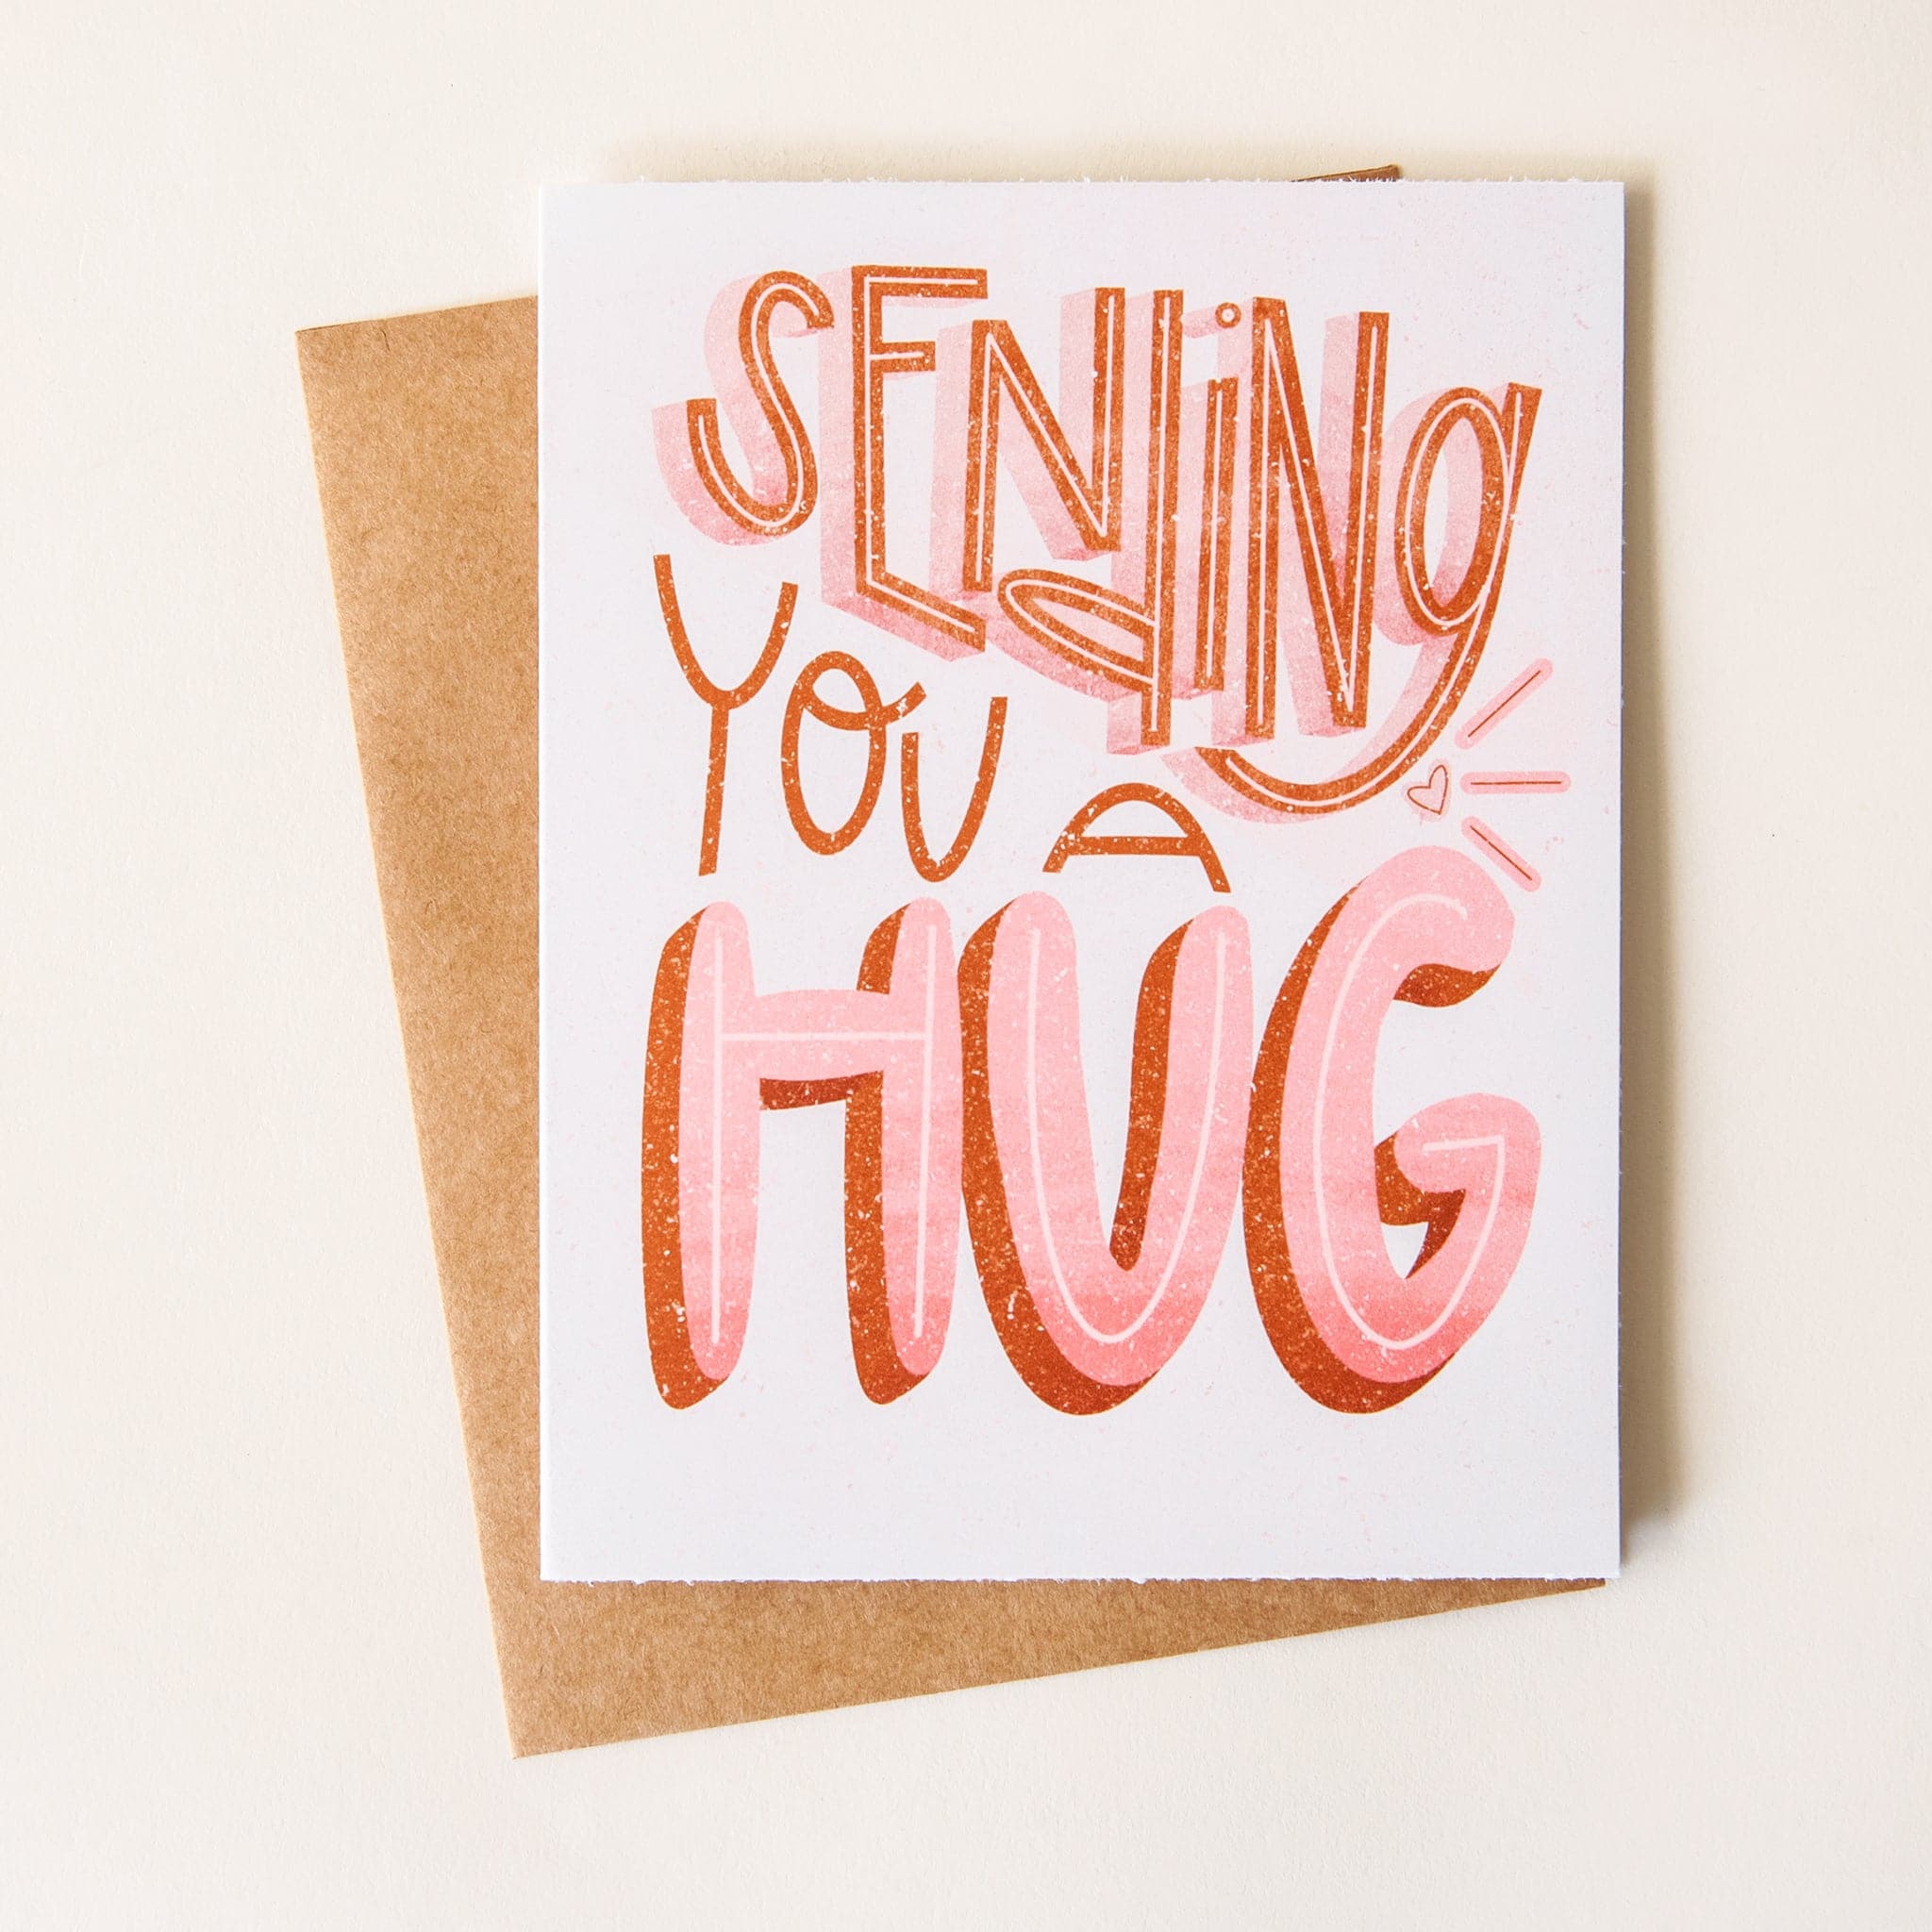 An adorable card with fun, playful font reading, &quot;Sending you a hug&quot;. The font takes up the whole card, and has rust and light pink coloring. There is a designed texture on the font, giving it a hand screened look.